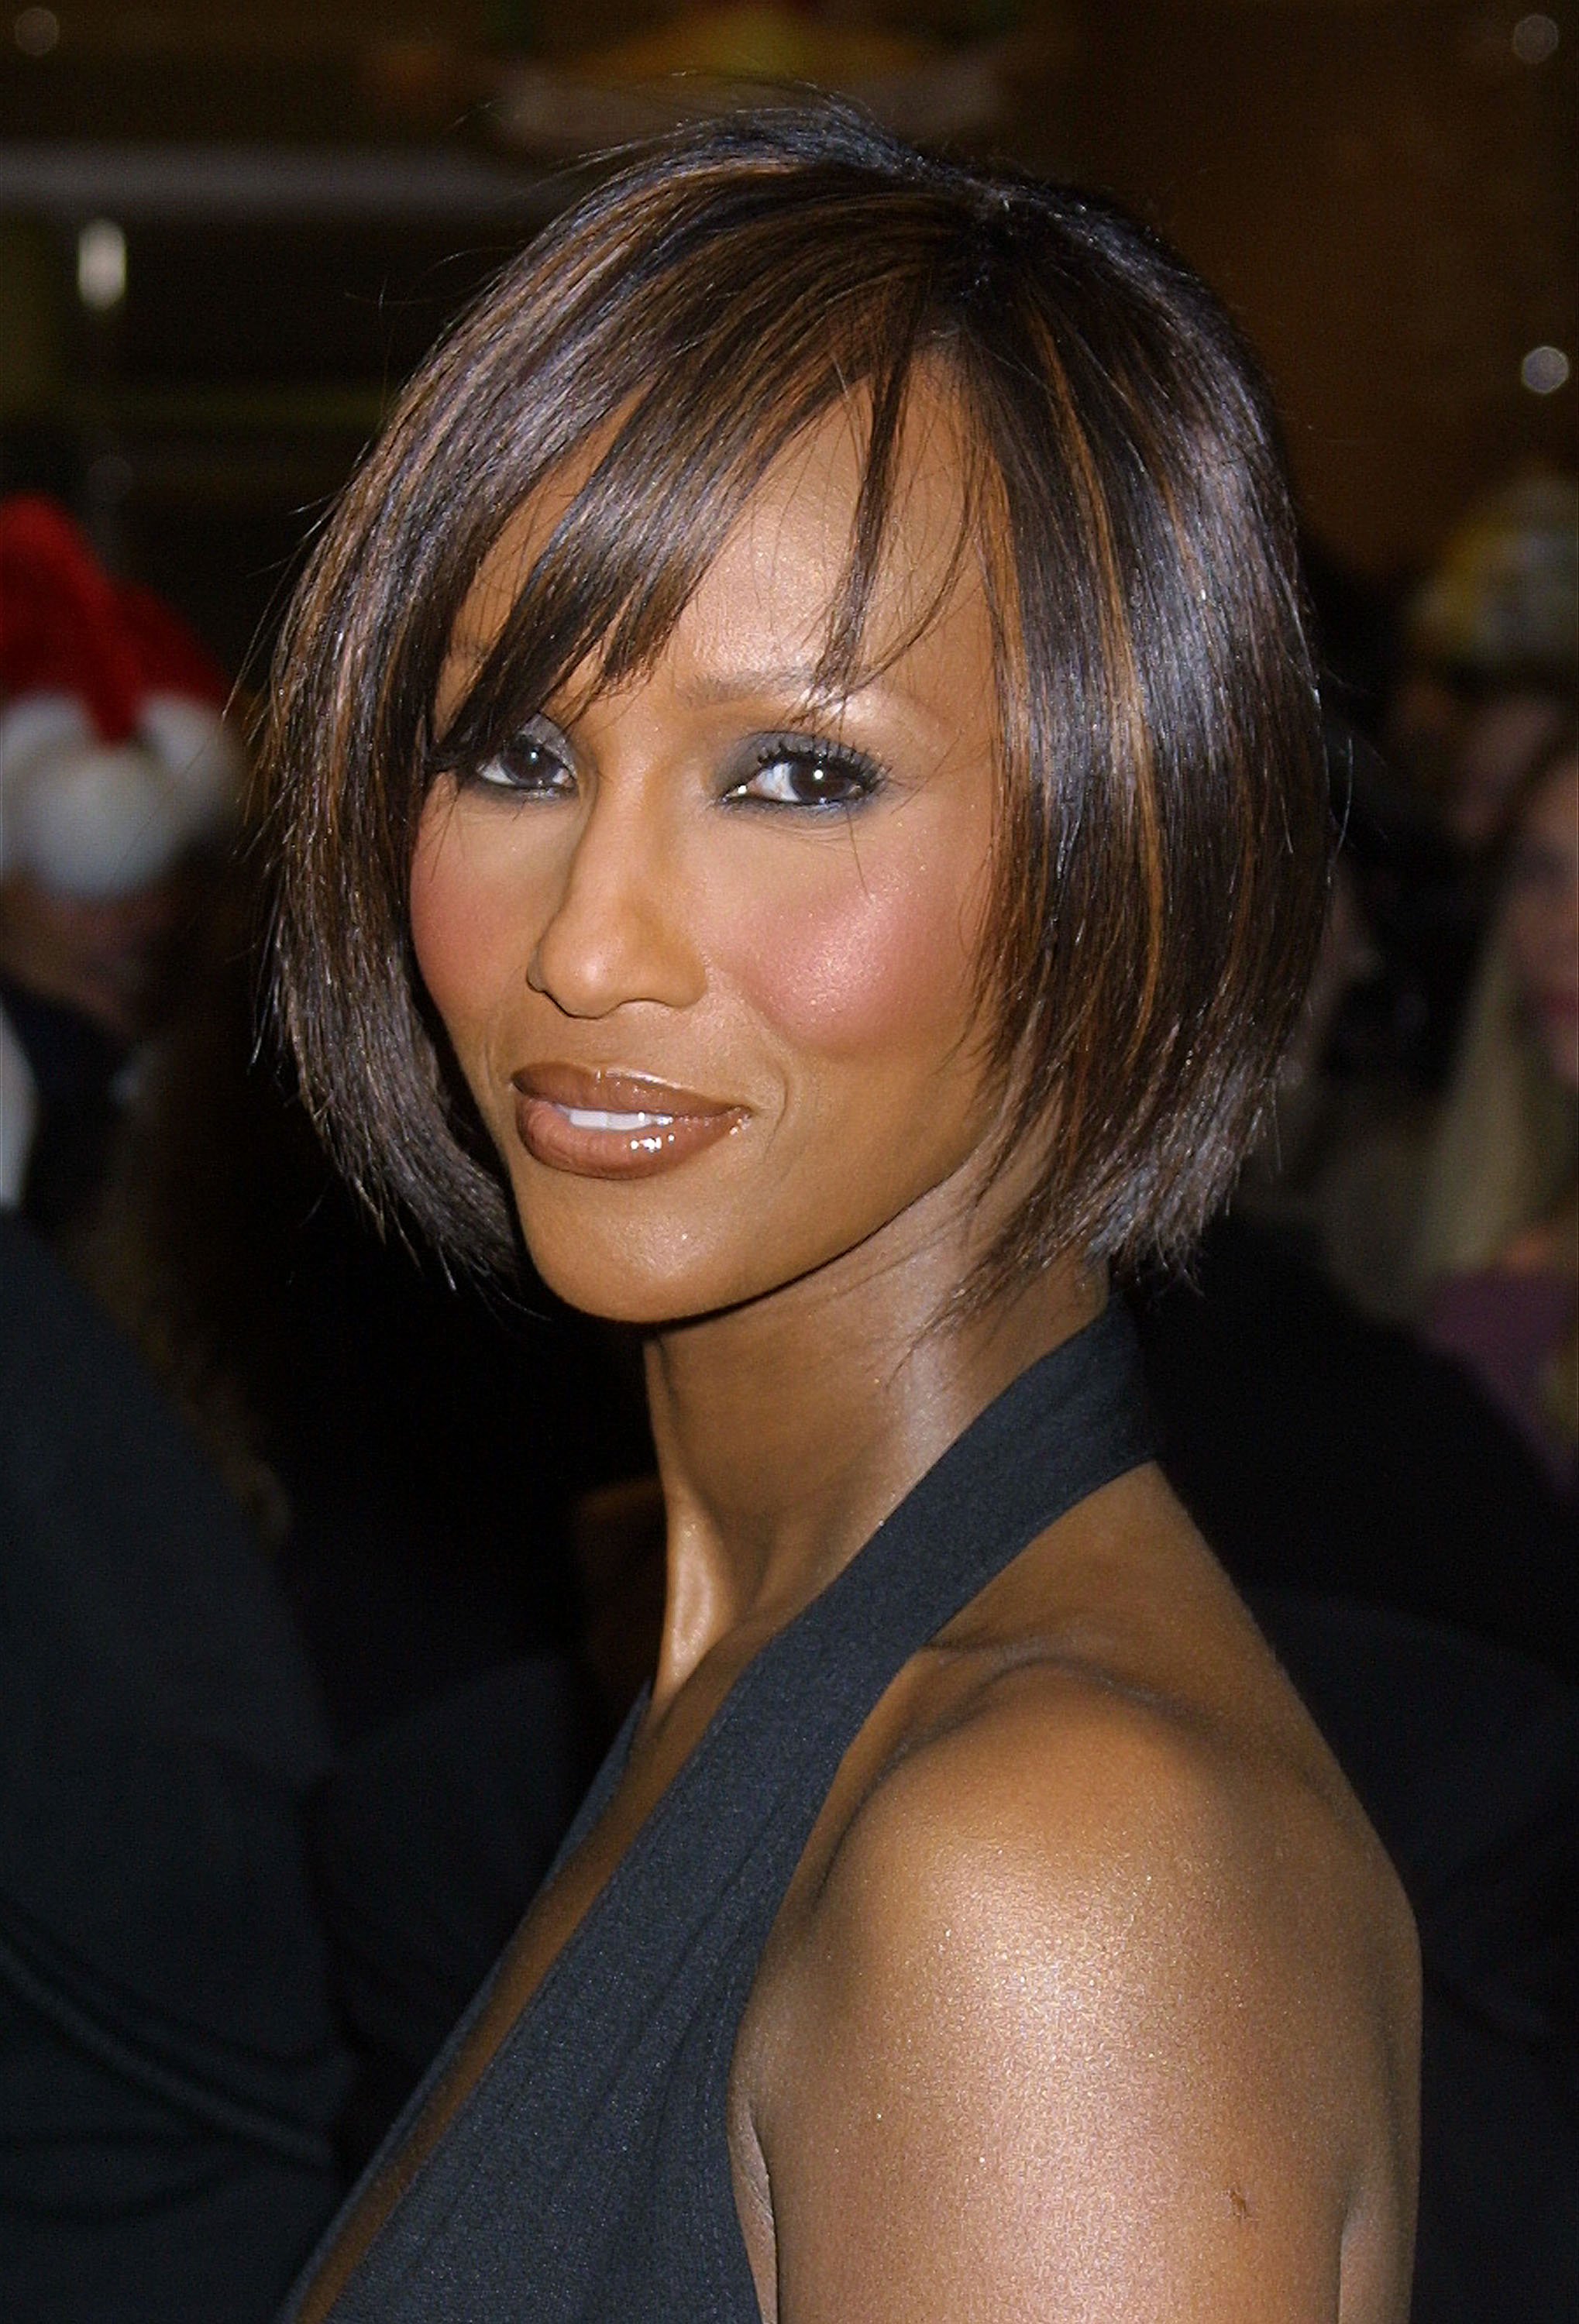 Iman makes an in store appearance to sign copies of her new book " I Am Iman" at Henri Bendel November 20, 2001, in New York City. | Source: Getty Images.